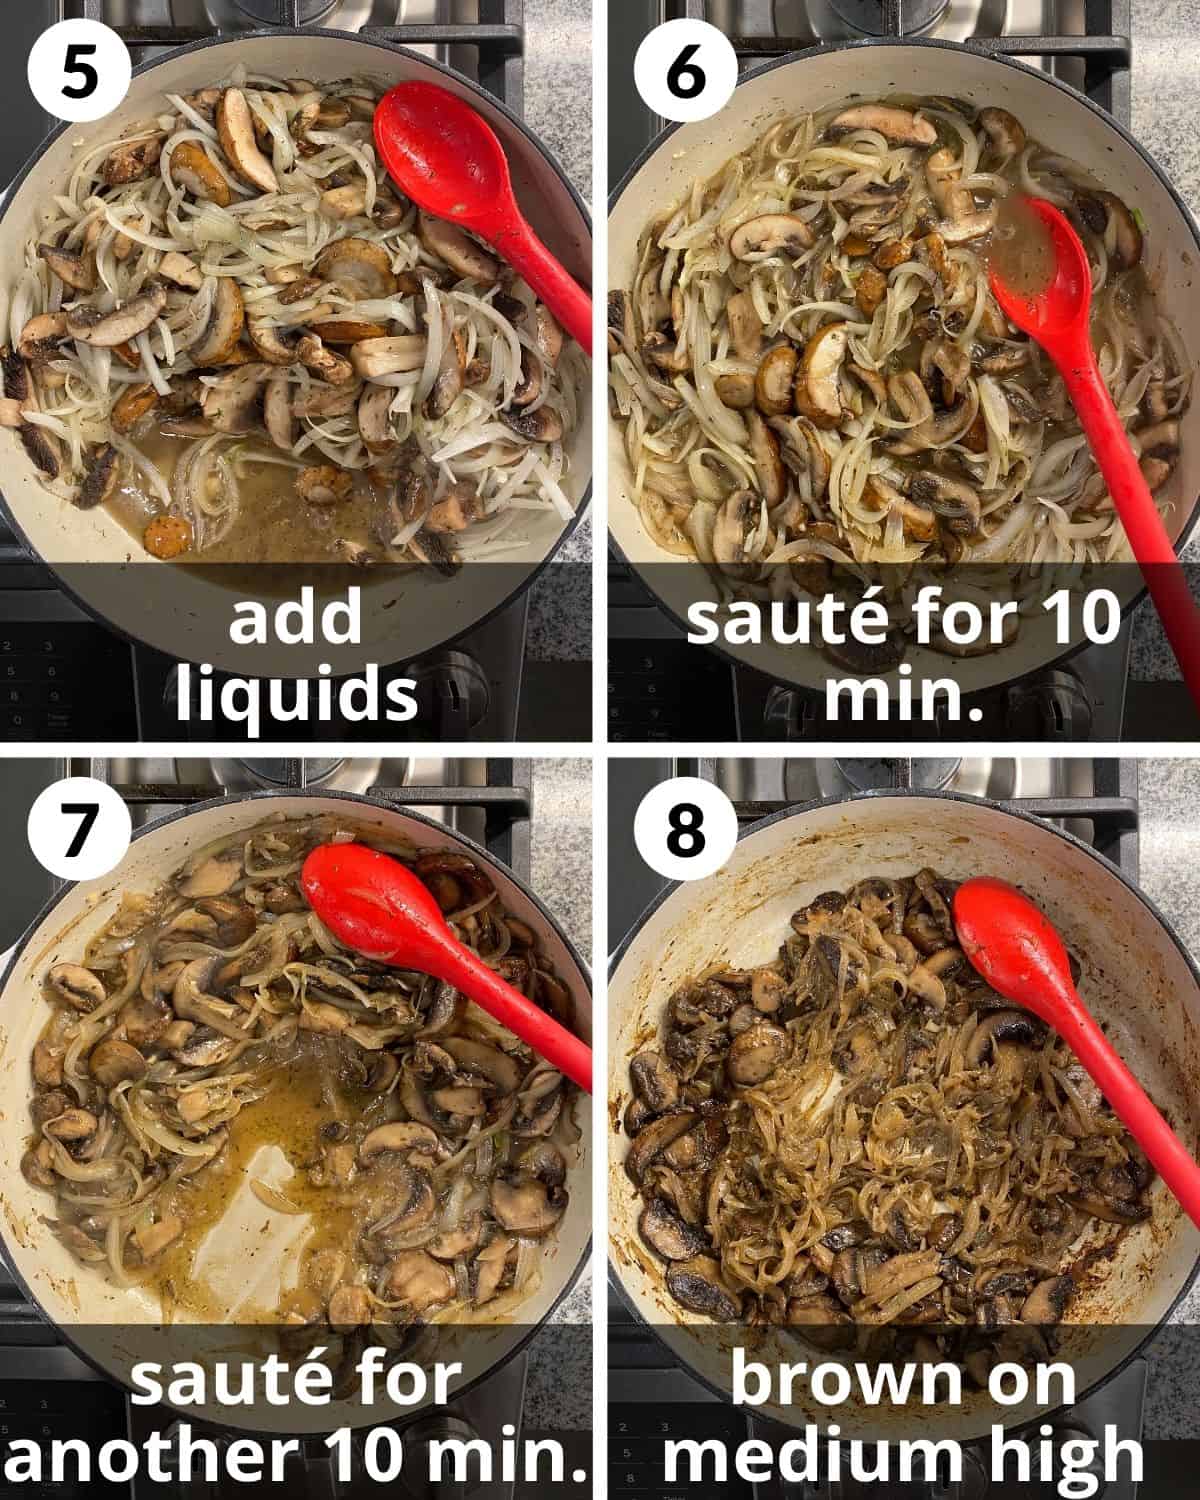 4 photos. Liquids added. Onions and mushrooms after 10 min, 20 min, and finished in pan. 